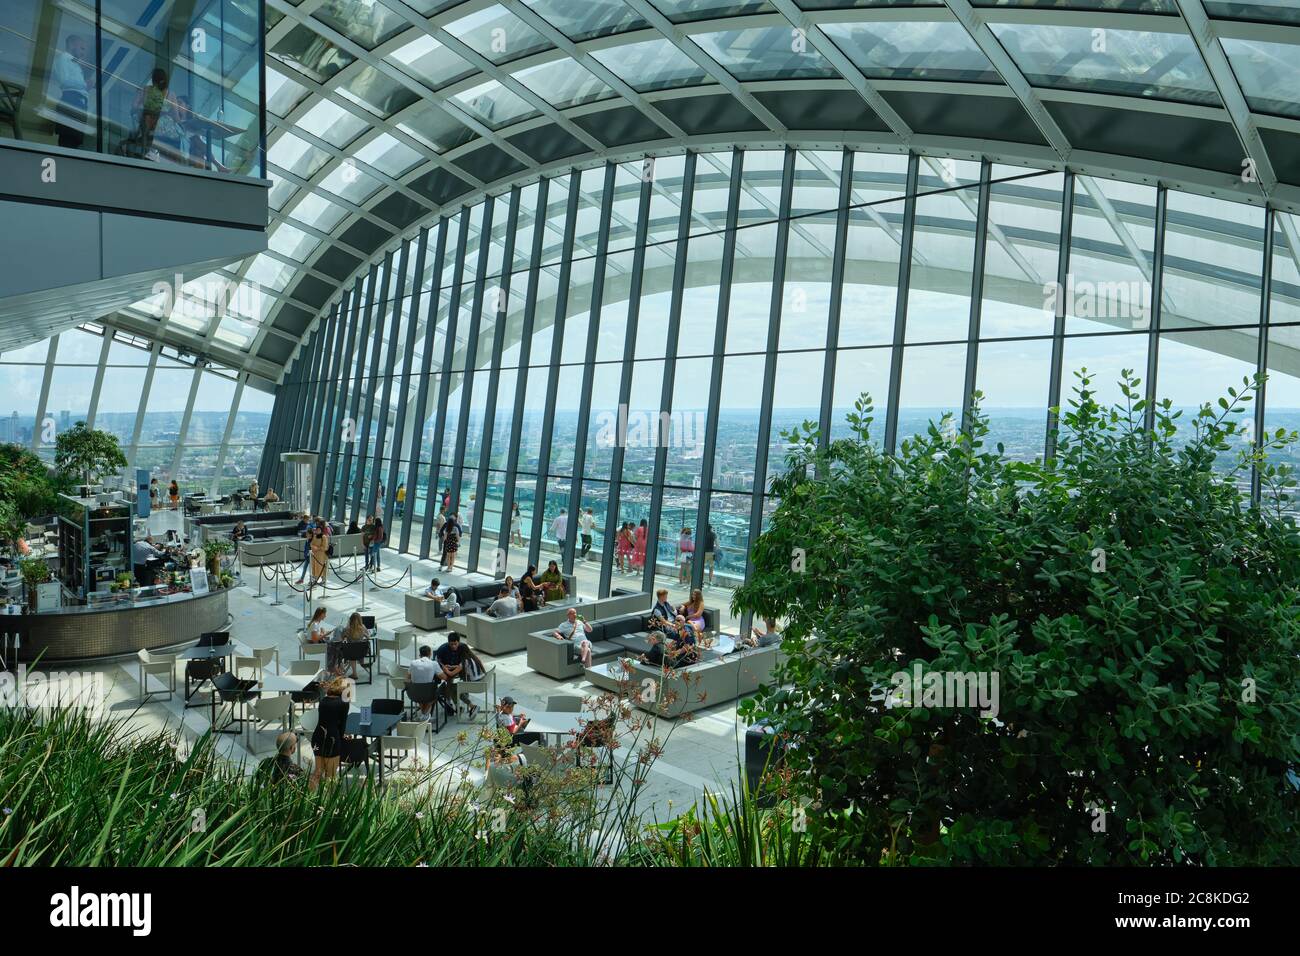 The Sky Garden at 20 Fenchurch Street, a public space designed by Rafael Vinoly Architects featuring a stylish restaurant, brasserie and cocktail bar. Stock Photo